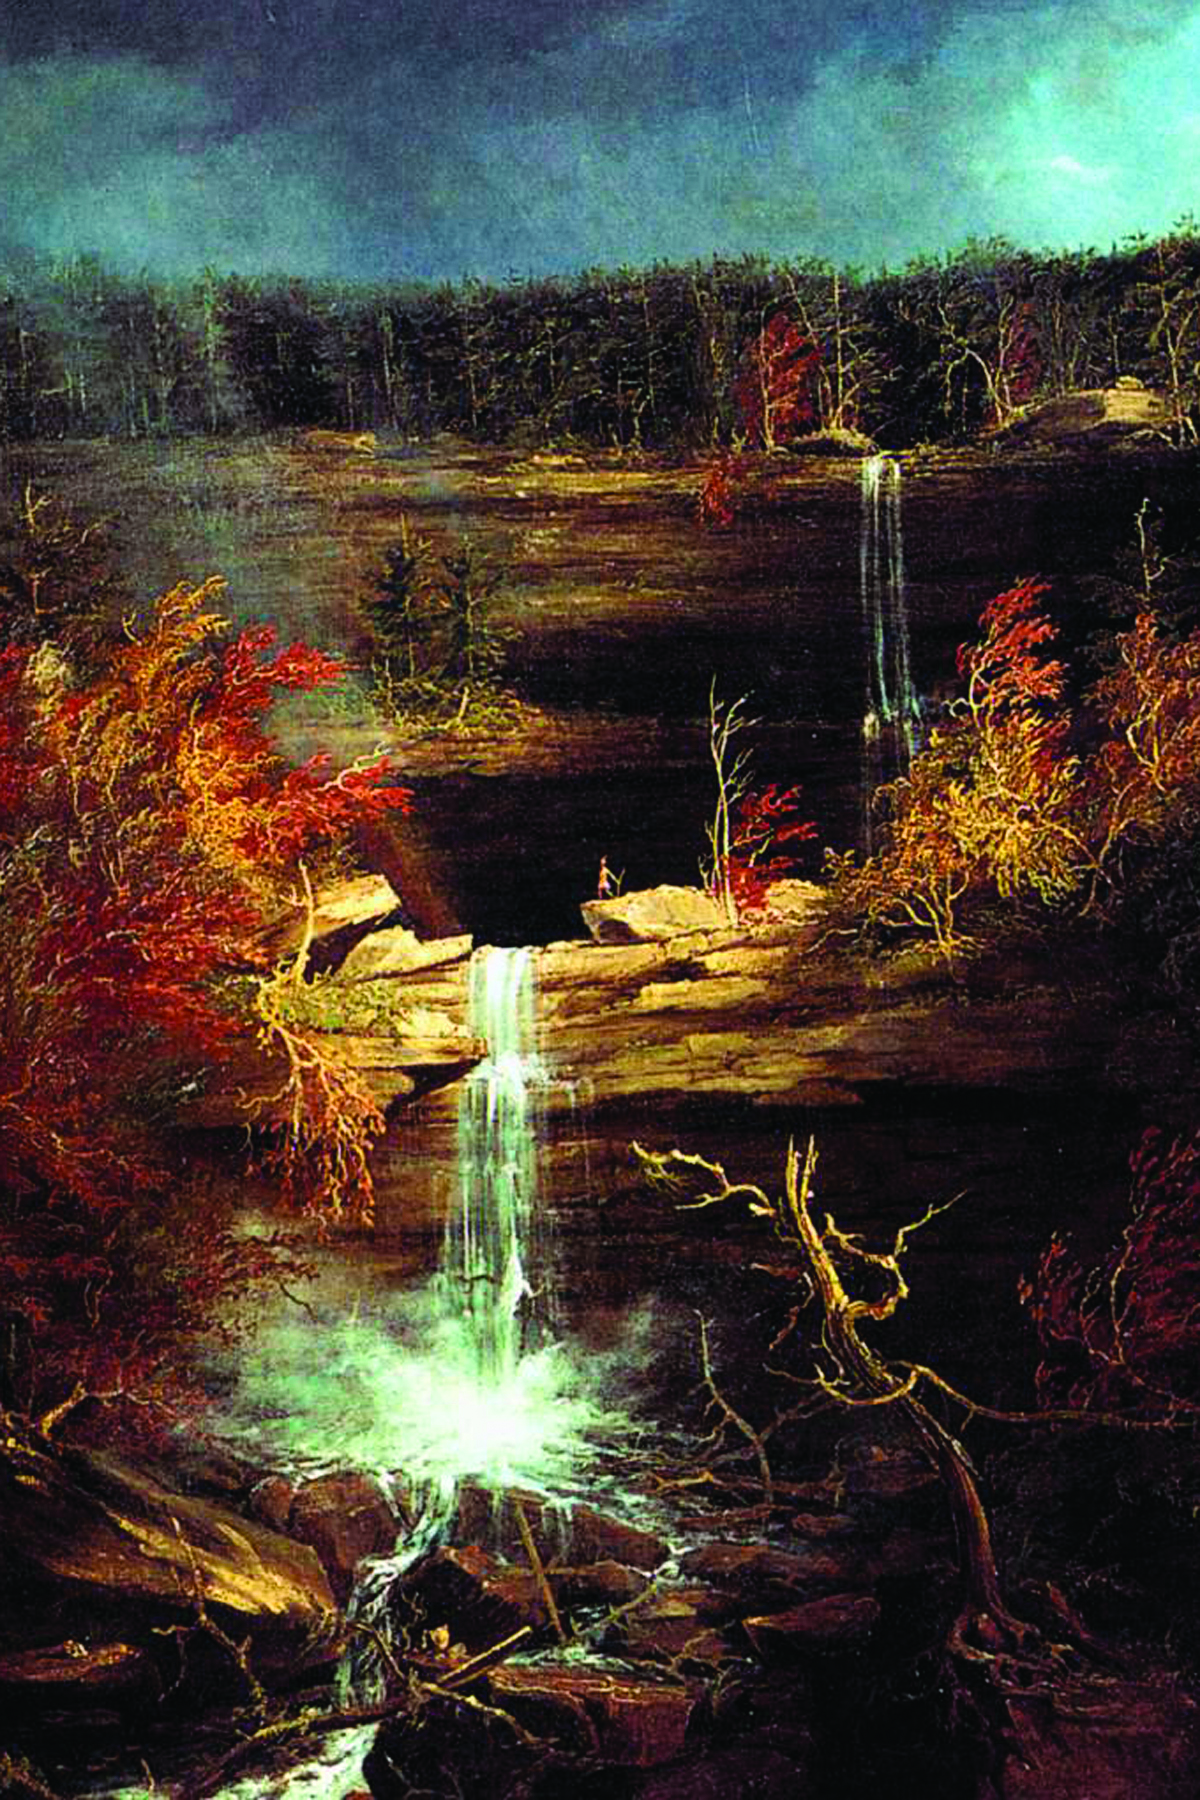 Fig. 11: THOMAS COLE, "Kaaterskill Falls," 1825, oil on canvas, 49 x 36 in., private collection